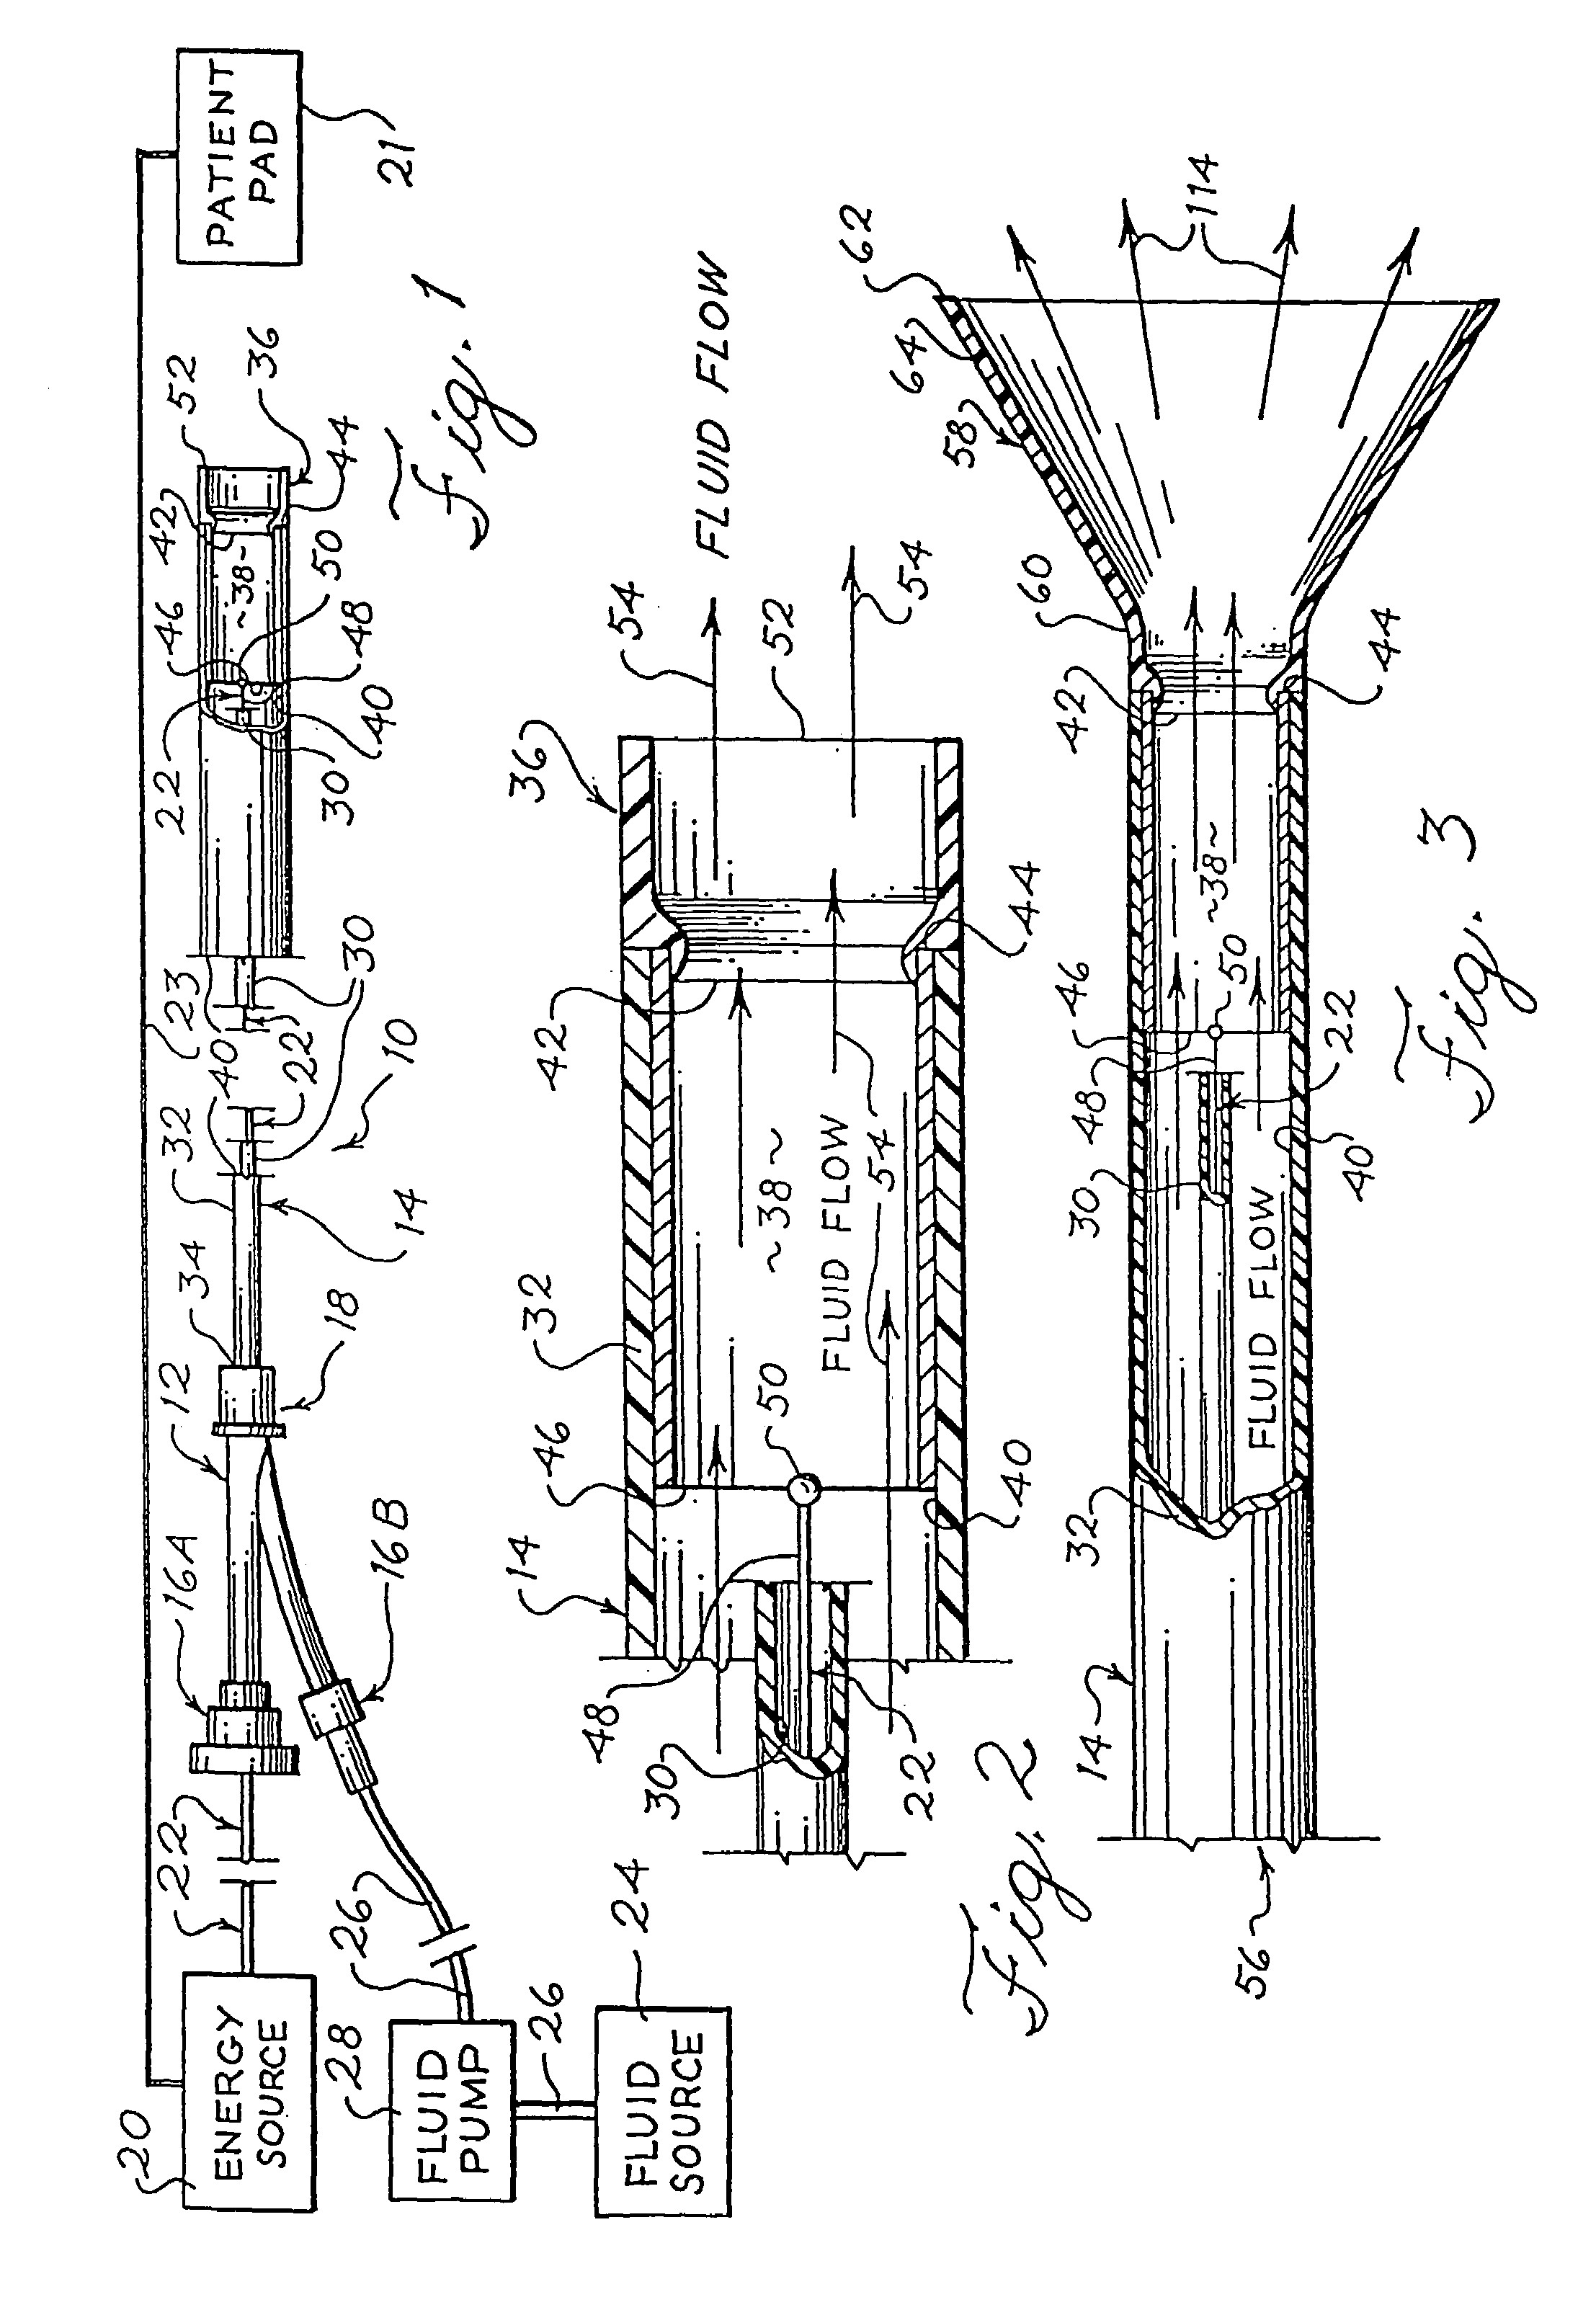 Electrophysiology energy treatment devices and methods of use